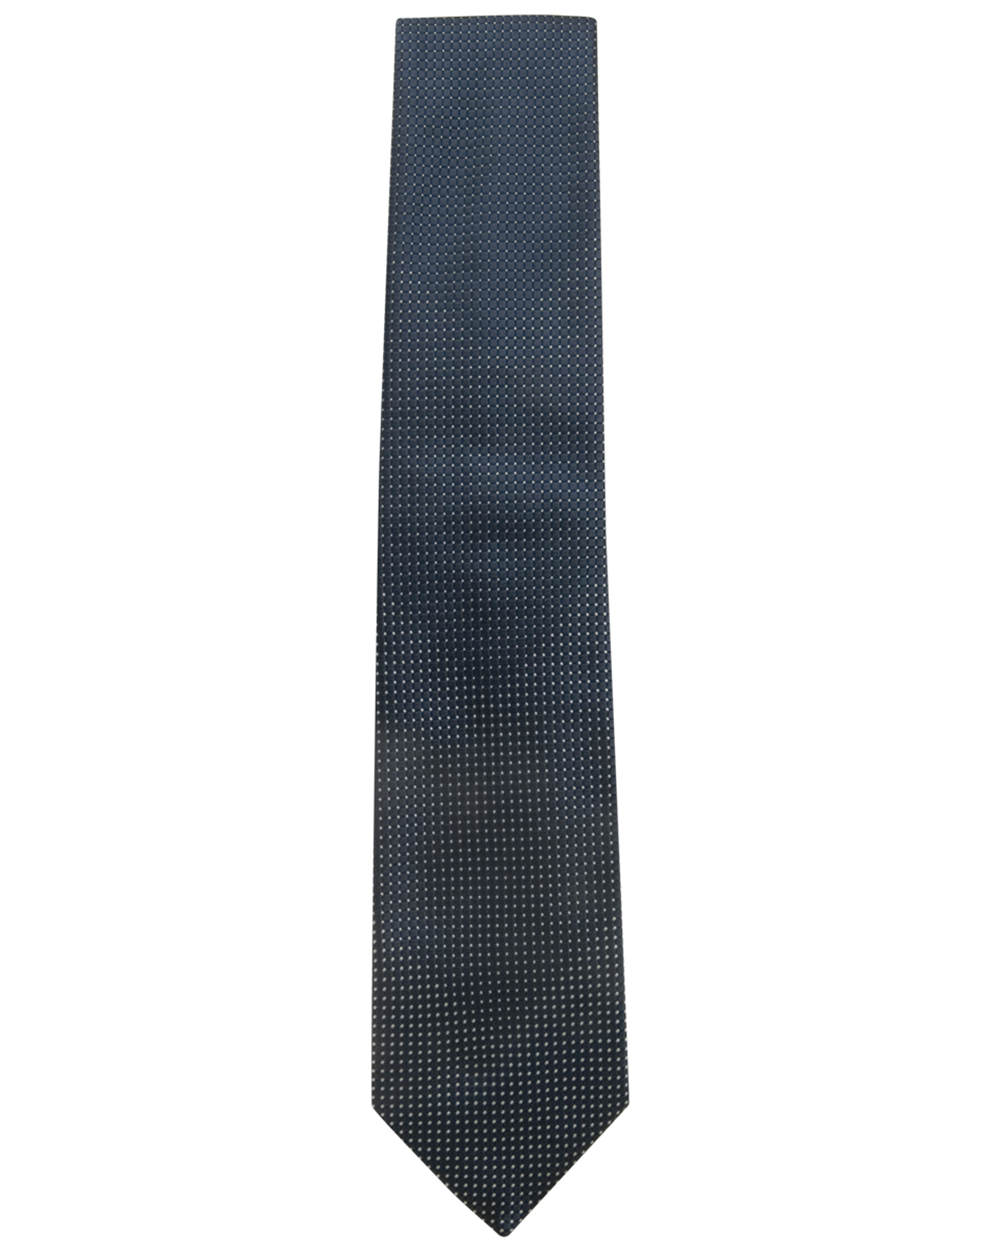 Navy and Off White Grid Tie